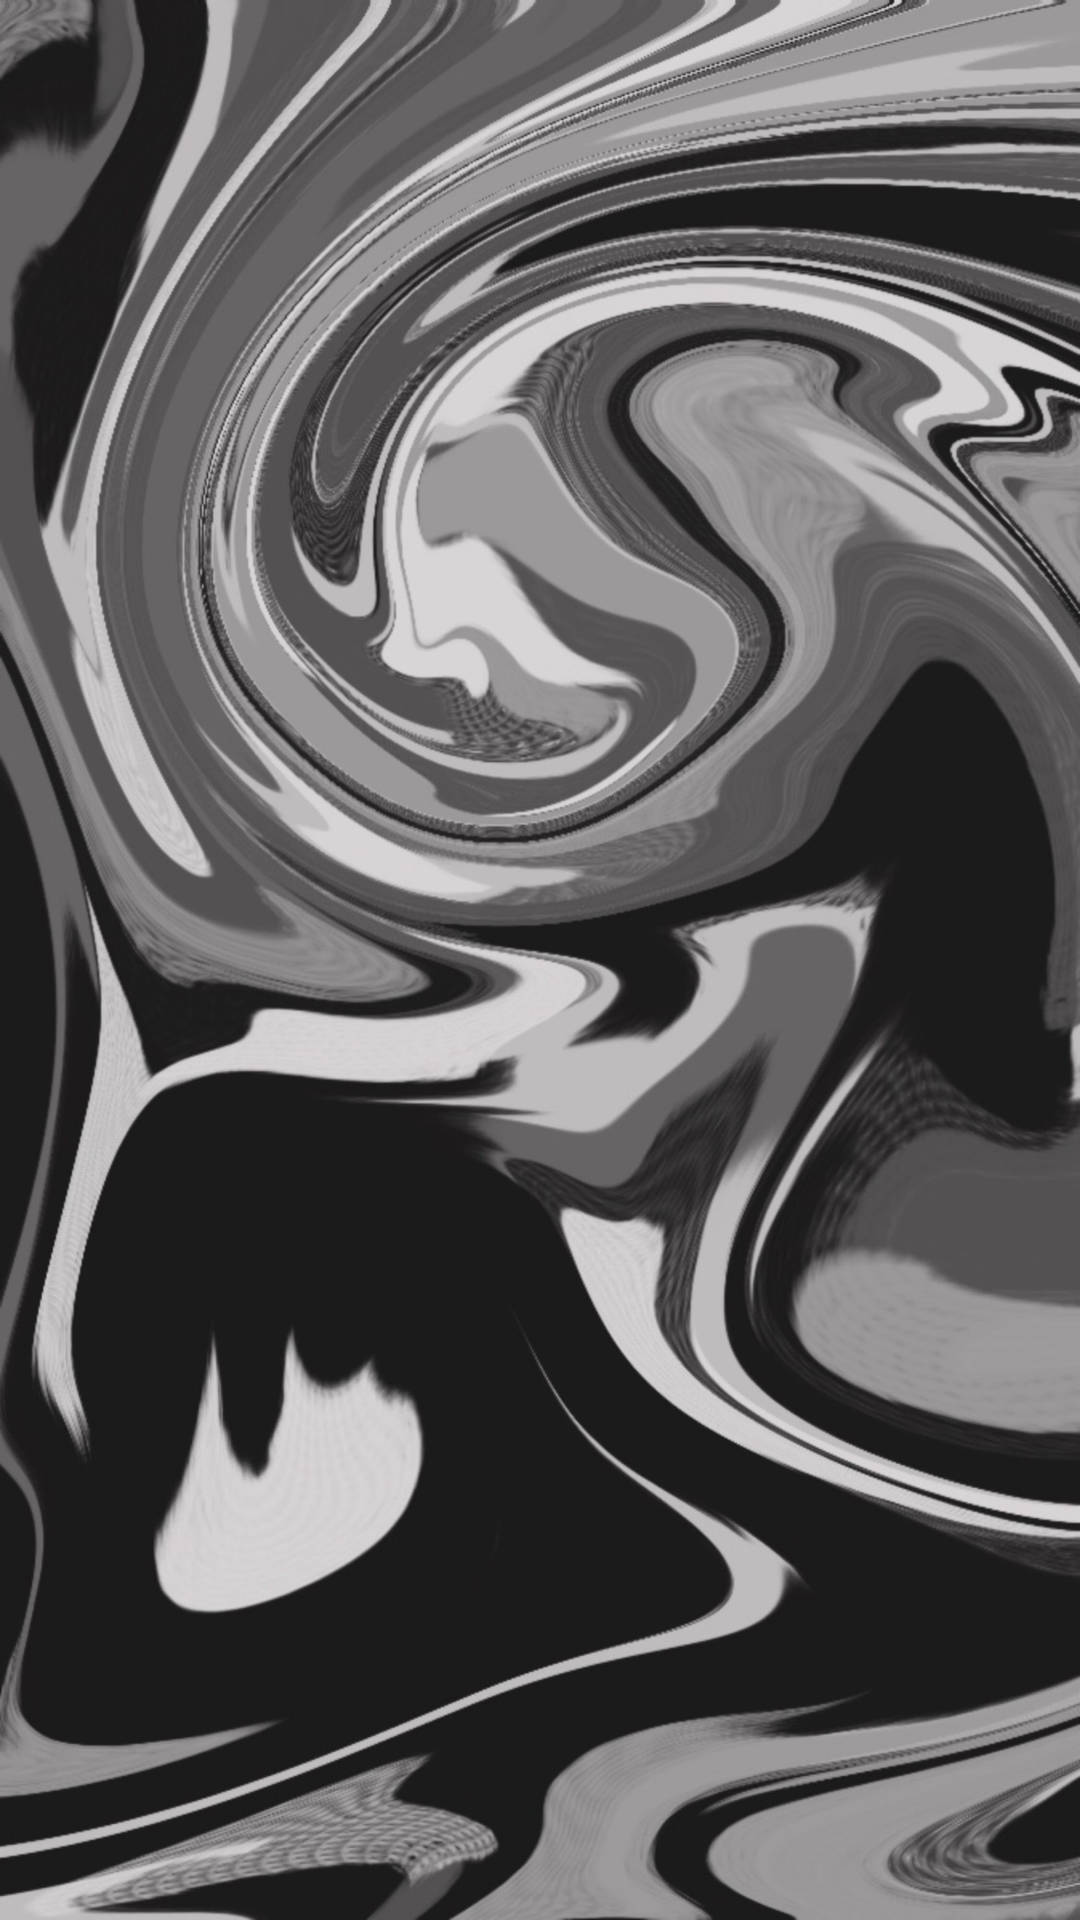 Abstract Swirl Black And Grey Iphone Wallpaper